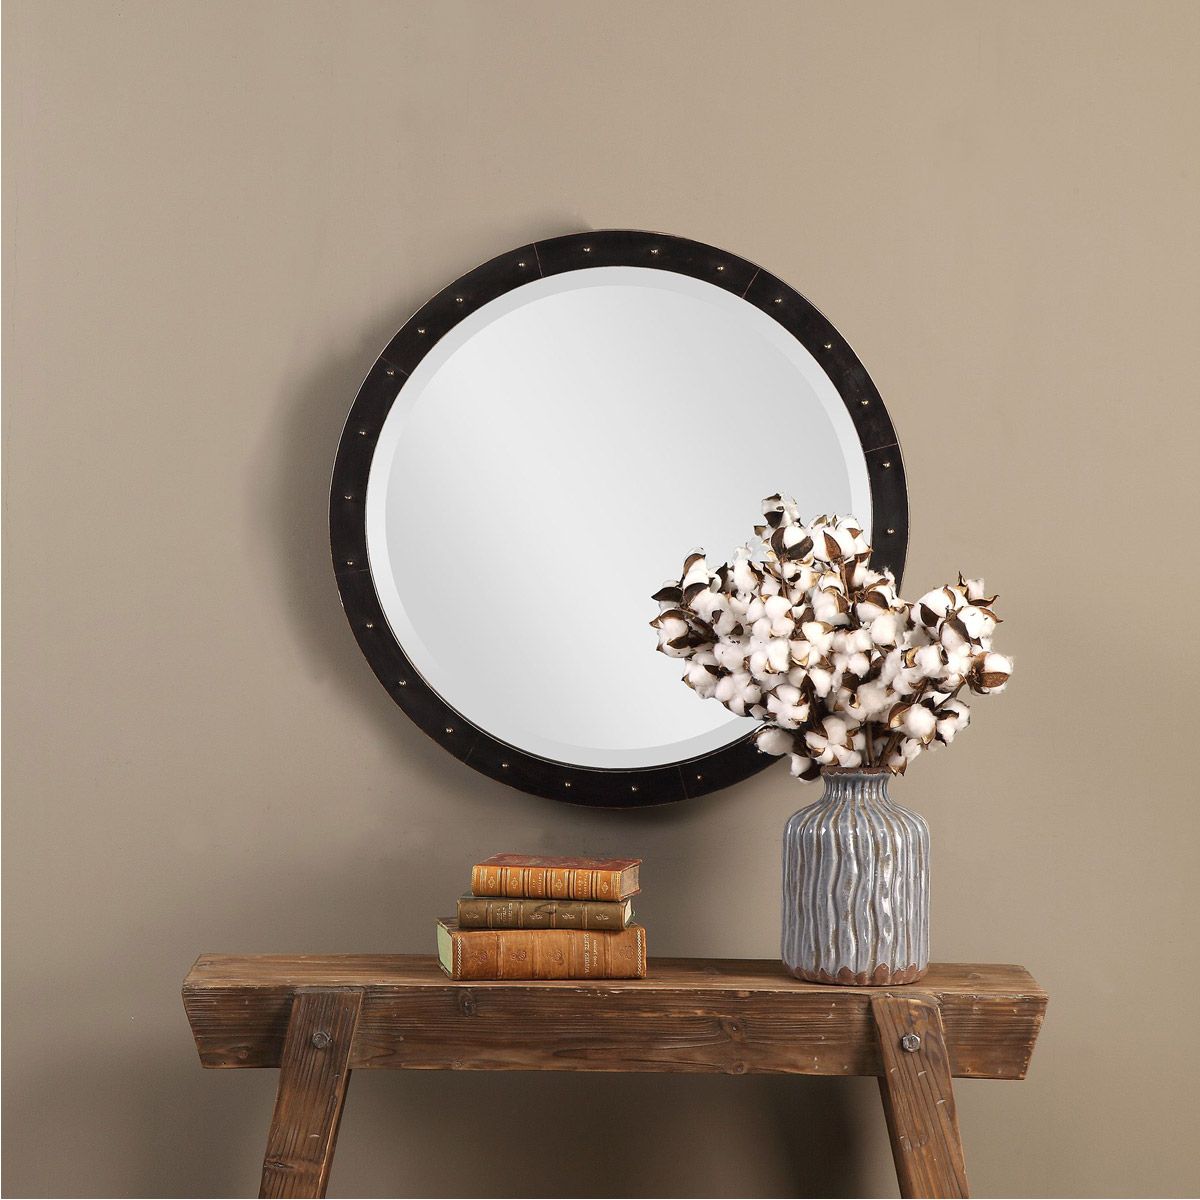 Ebay Pertaining To Well Liked Distressed Dark Bronze Wall Mirrors (View 2 of 15)